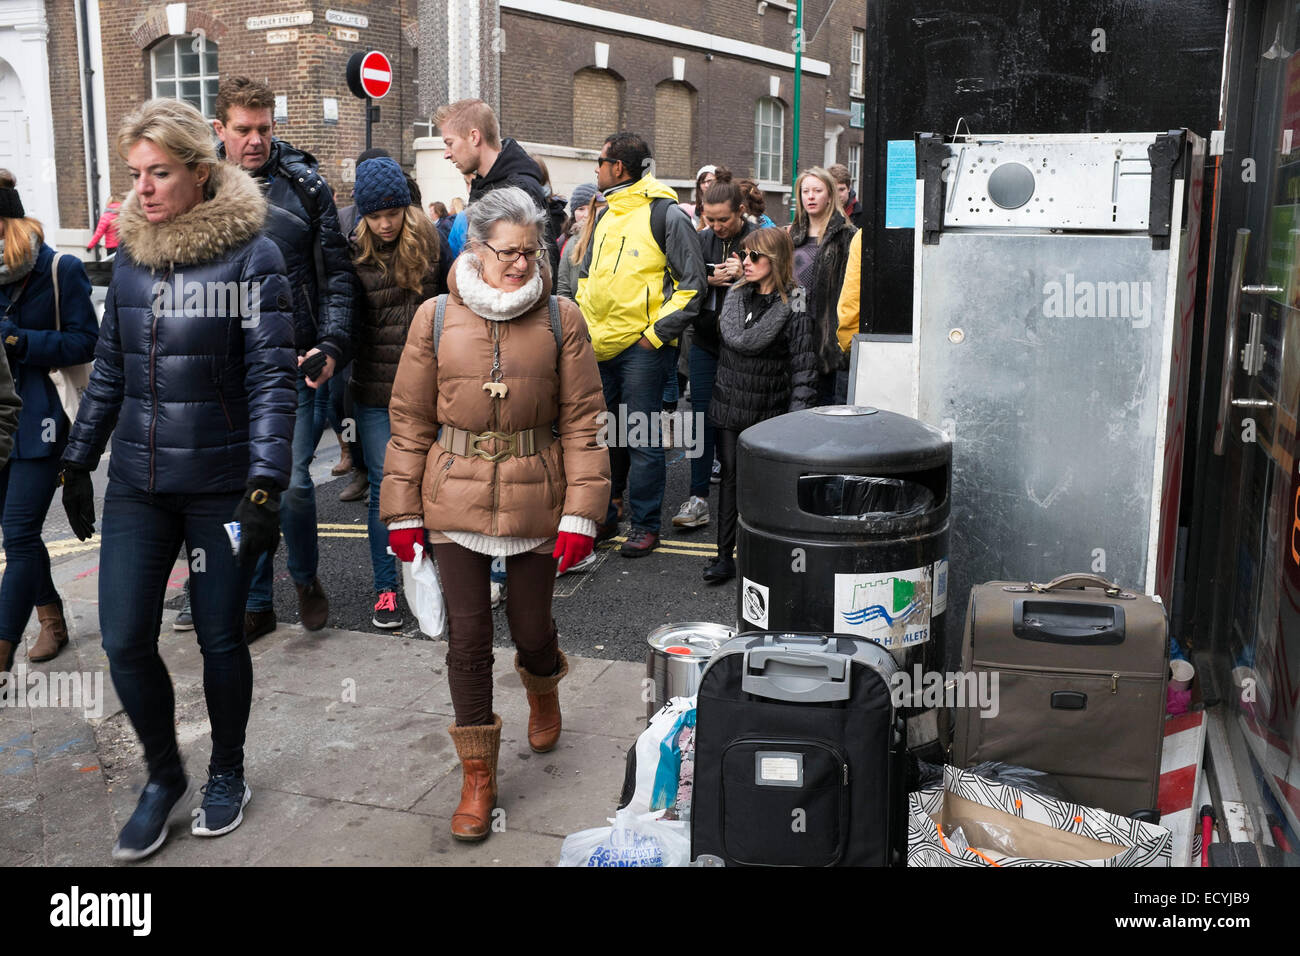 Street scene at Brick Lane Market in the East End of London, UK. A tour group looks and grimaces at waste left by a rubbish bin. Stock Photo